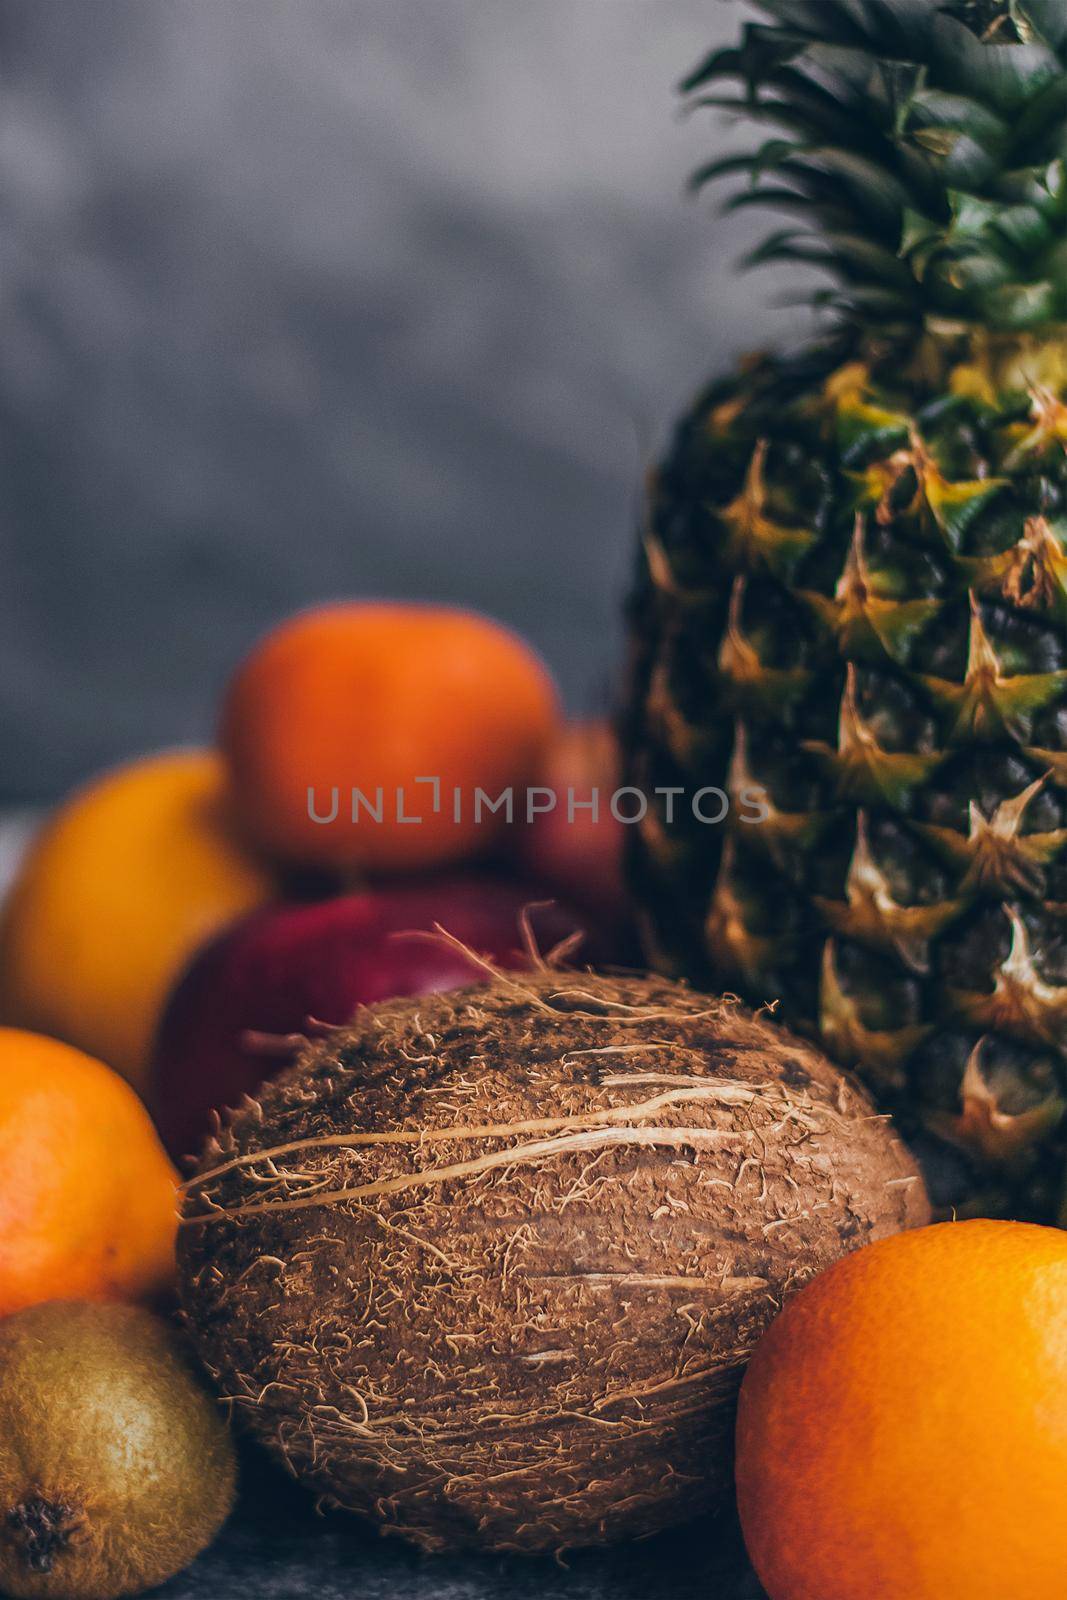 Colorful fresh tropical fruits on grey concrete background.